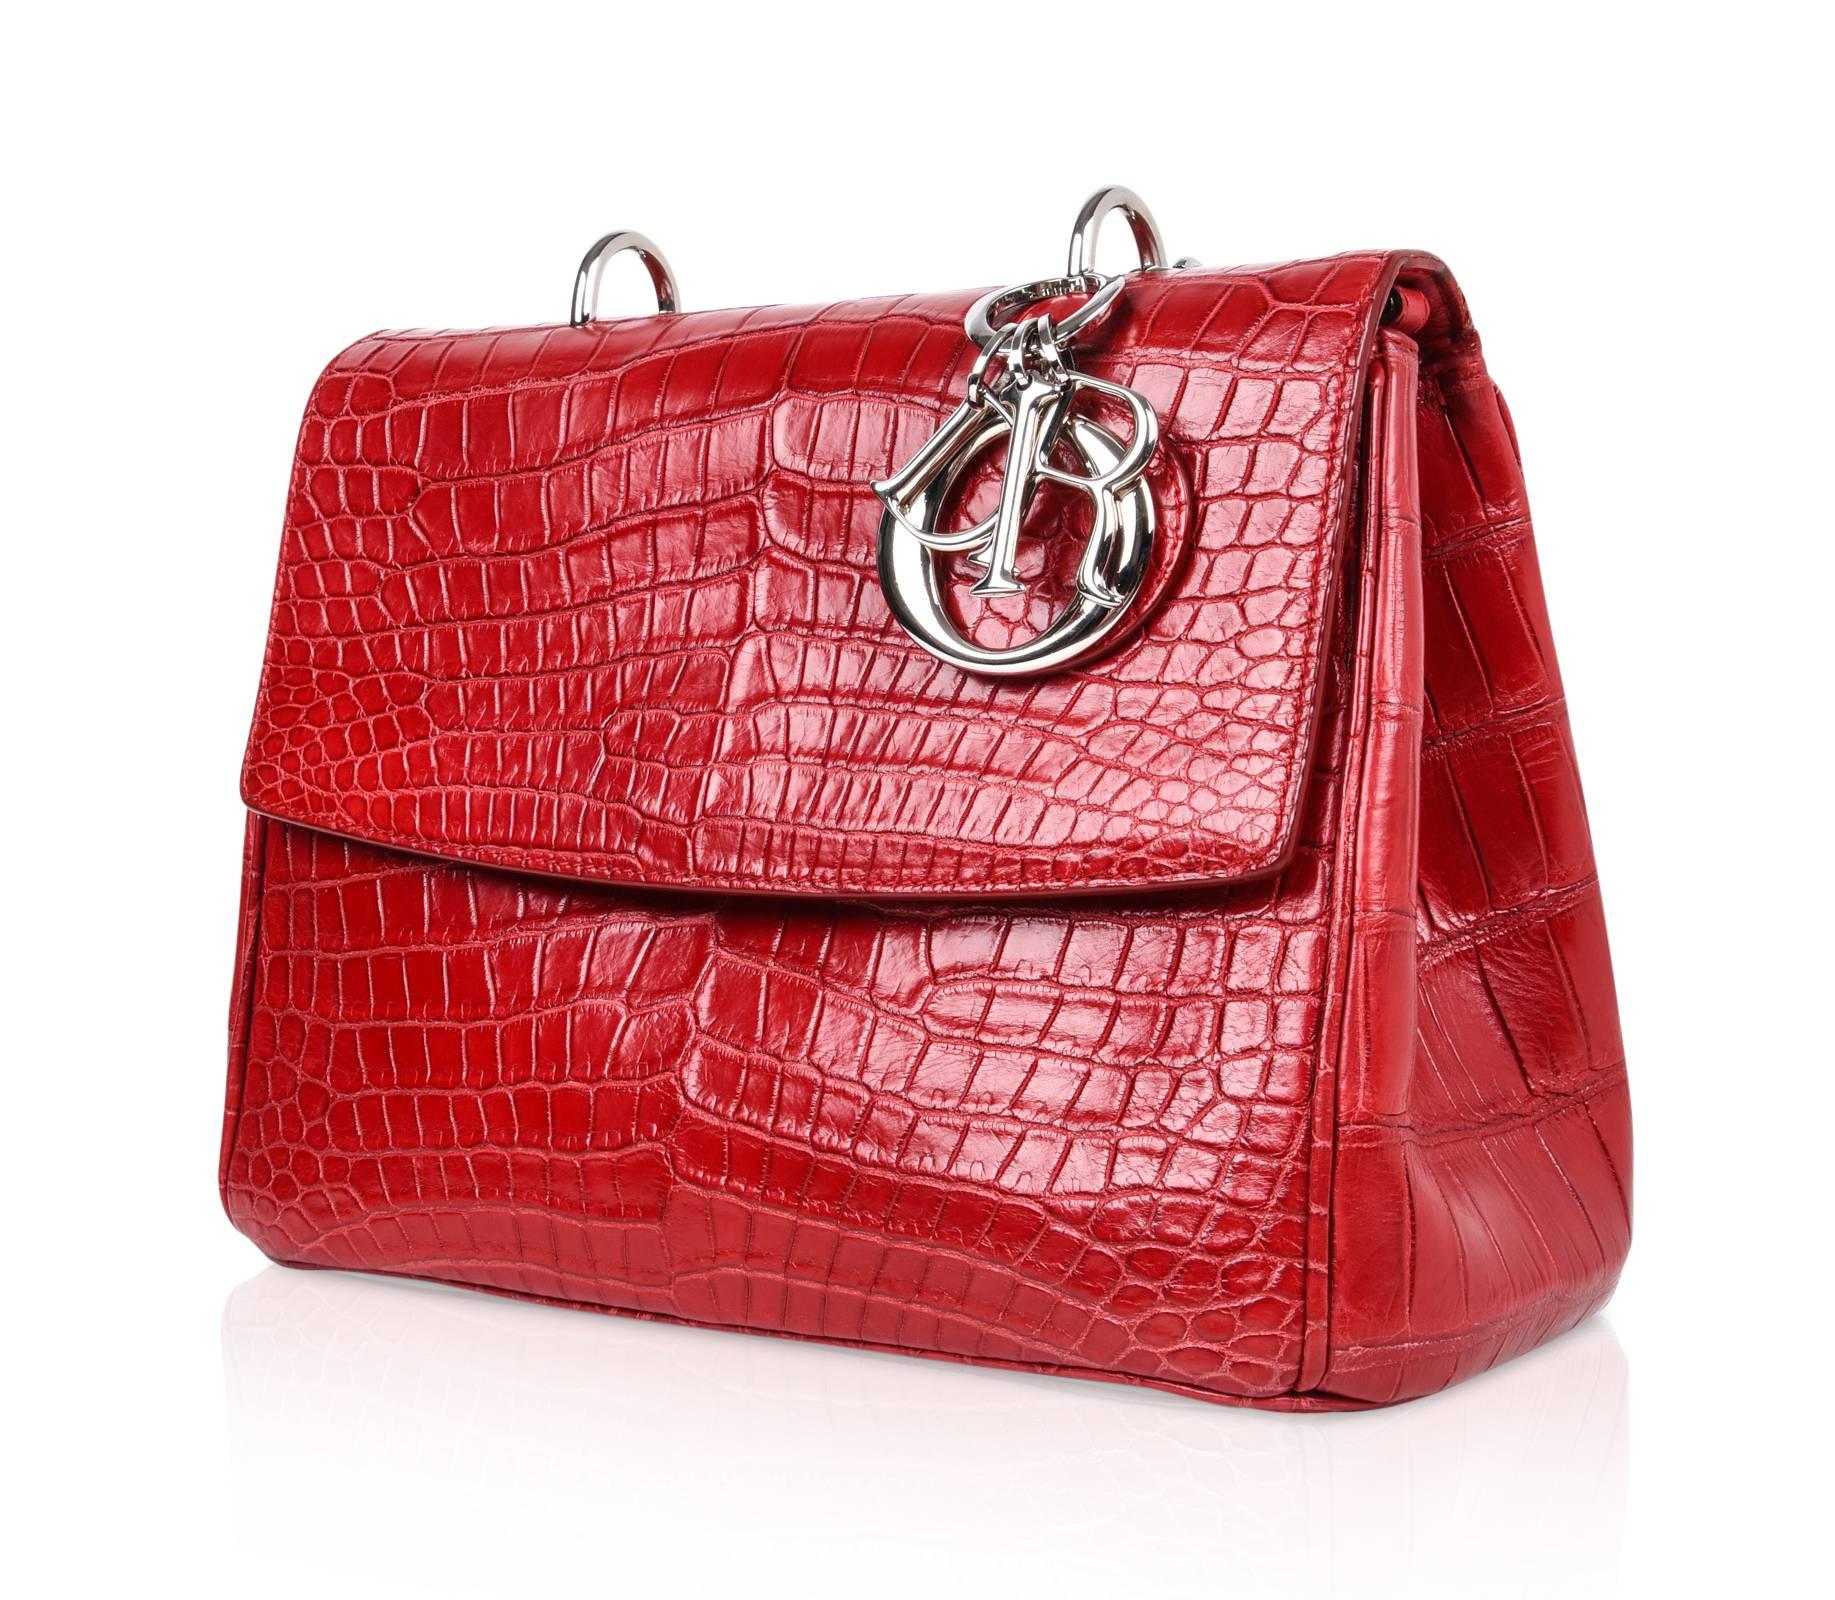 Guaranteed authentic Christian Dior Be Dior bag created Fall 2014 and was the brand's ad campaign with Jennifer Lawrence.
Carried by hand, cross body or shoulder bag.
Meant to be as day, evening or weekend bag, the front flap to this elegant bag